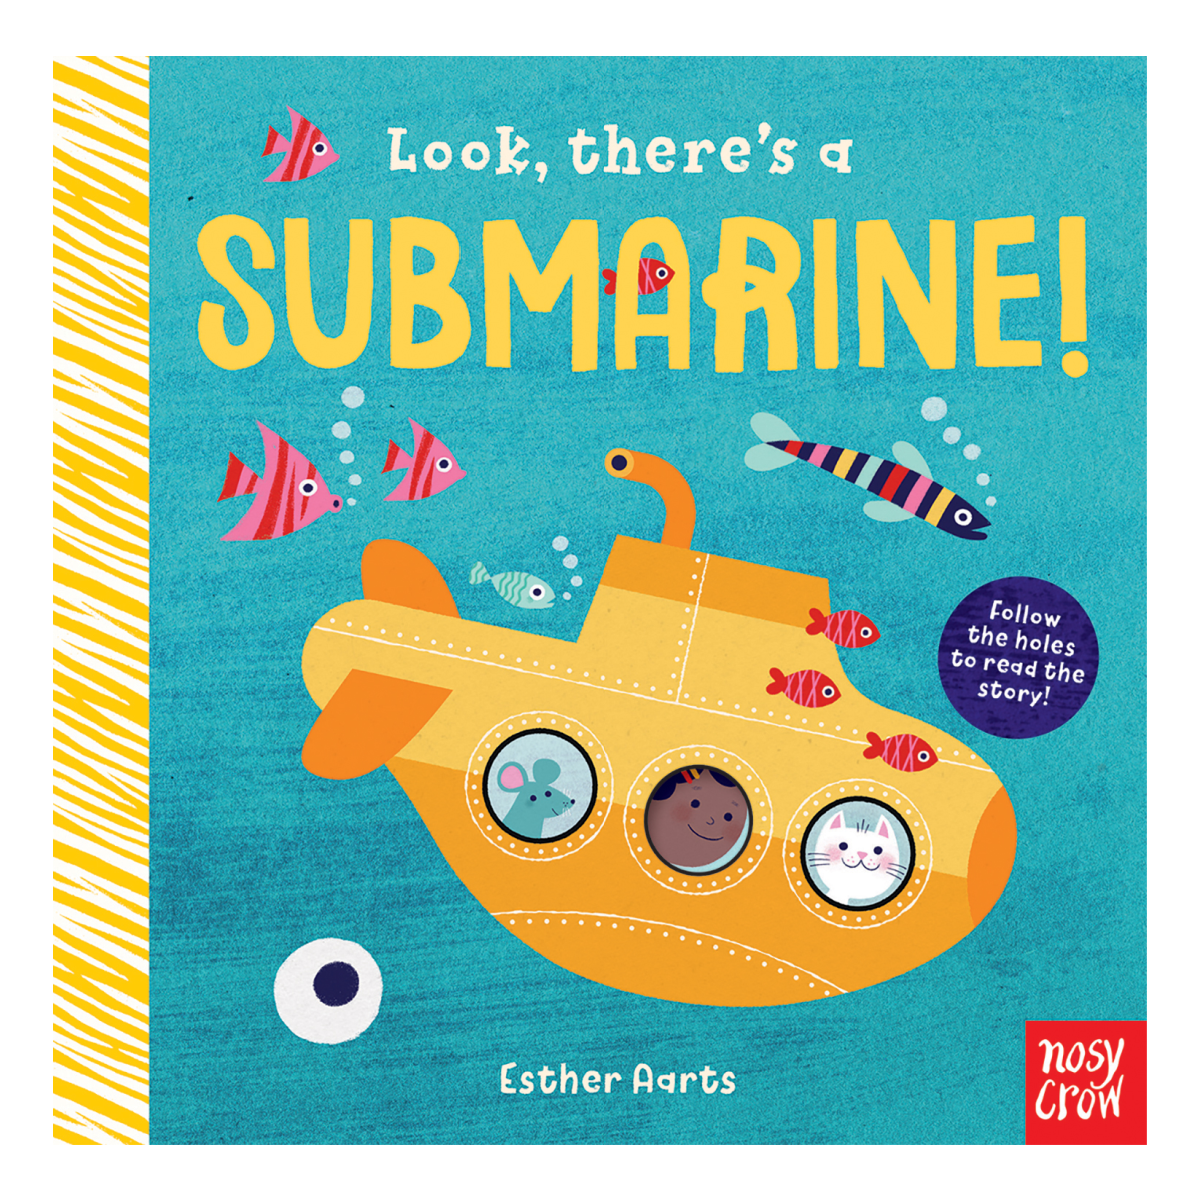 Look, there's a Submarine!